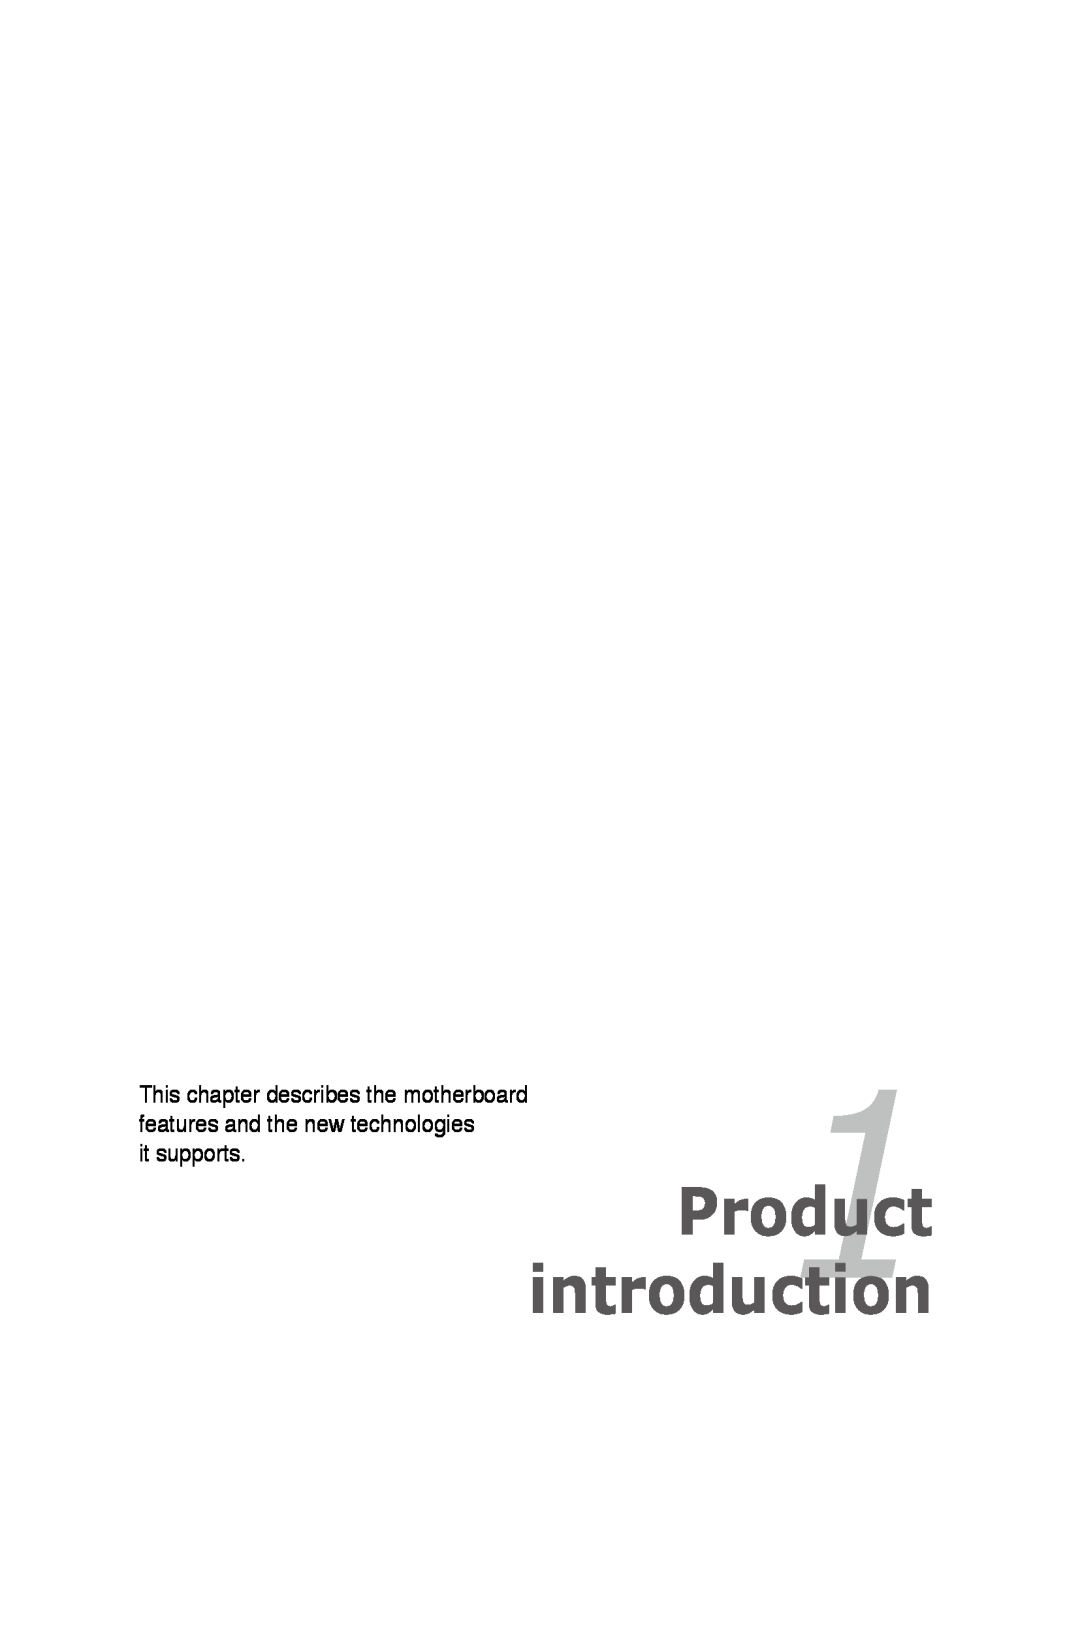 Asus P5K/EPU manual Product1 introduction, it supports 